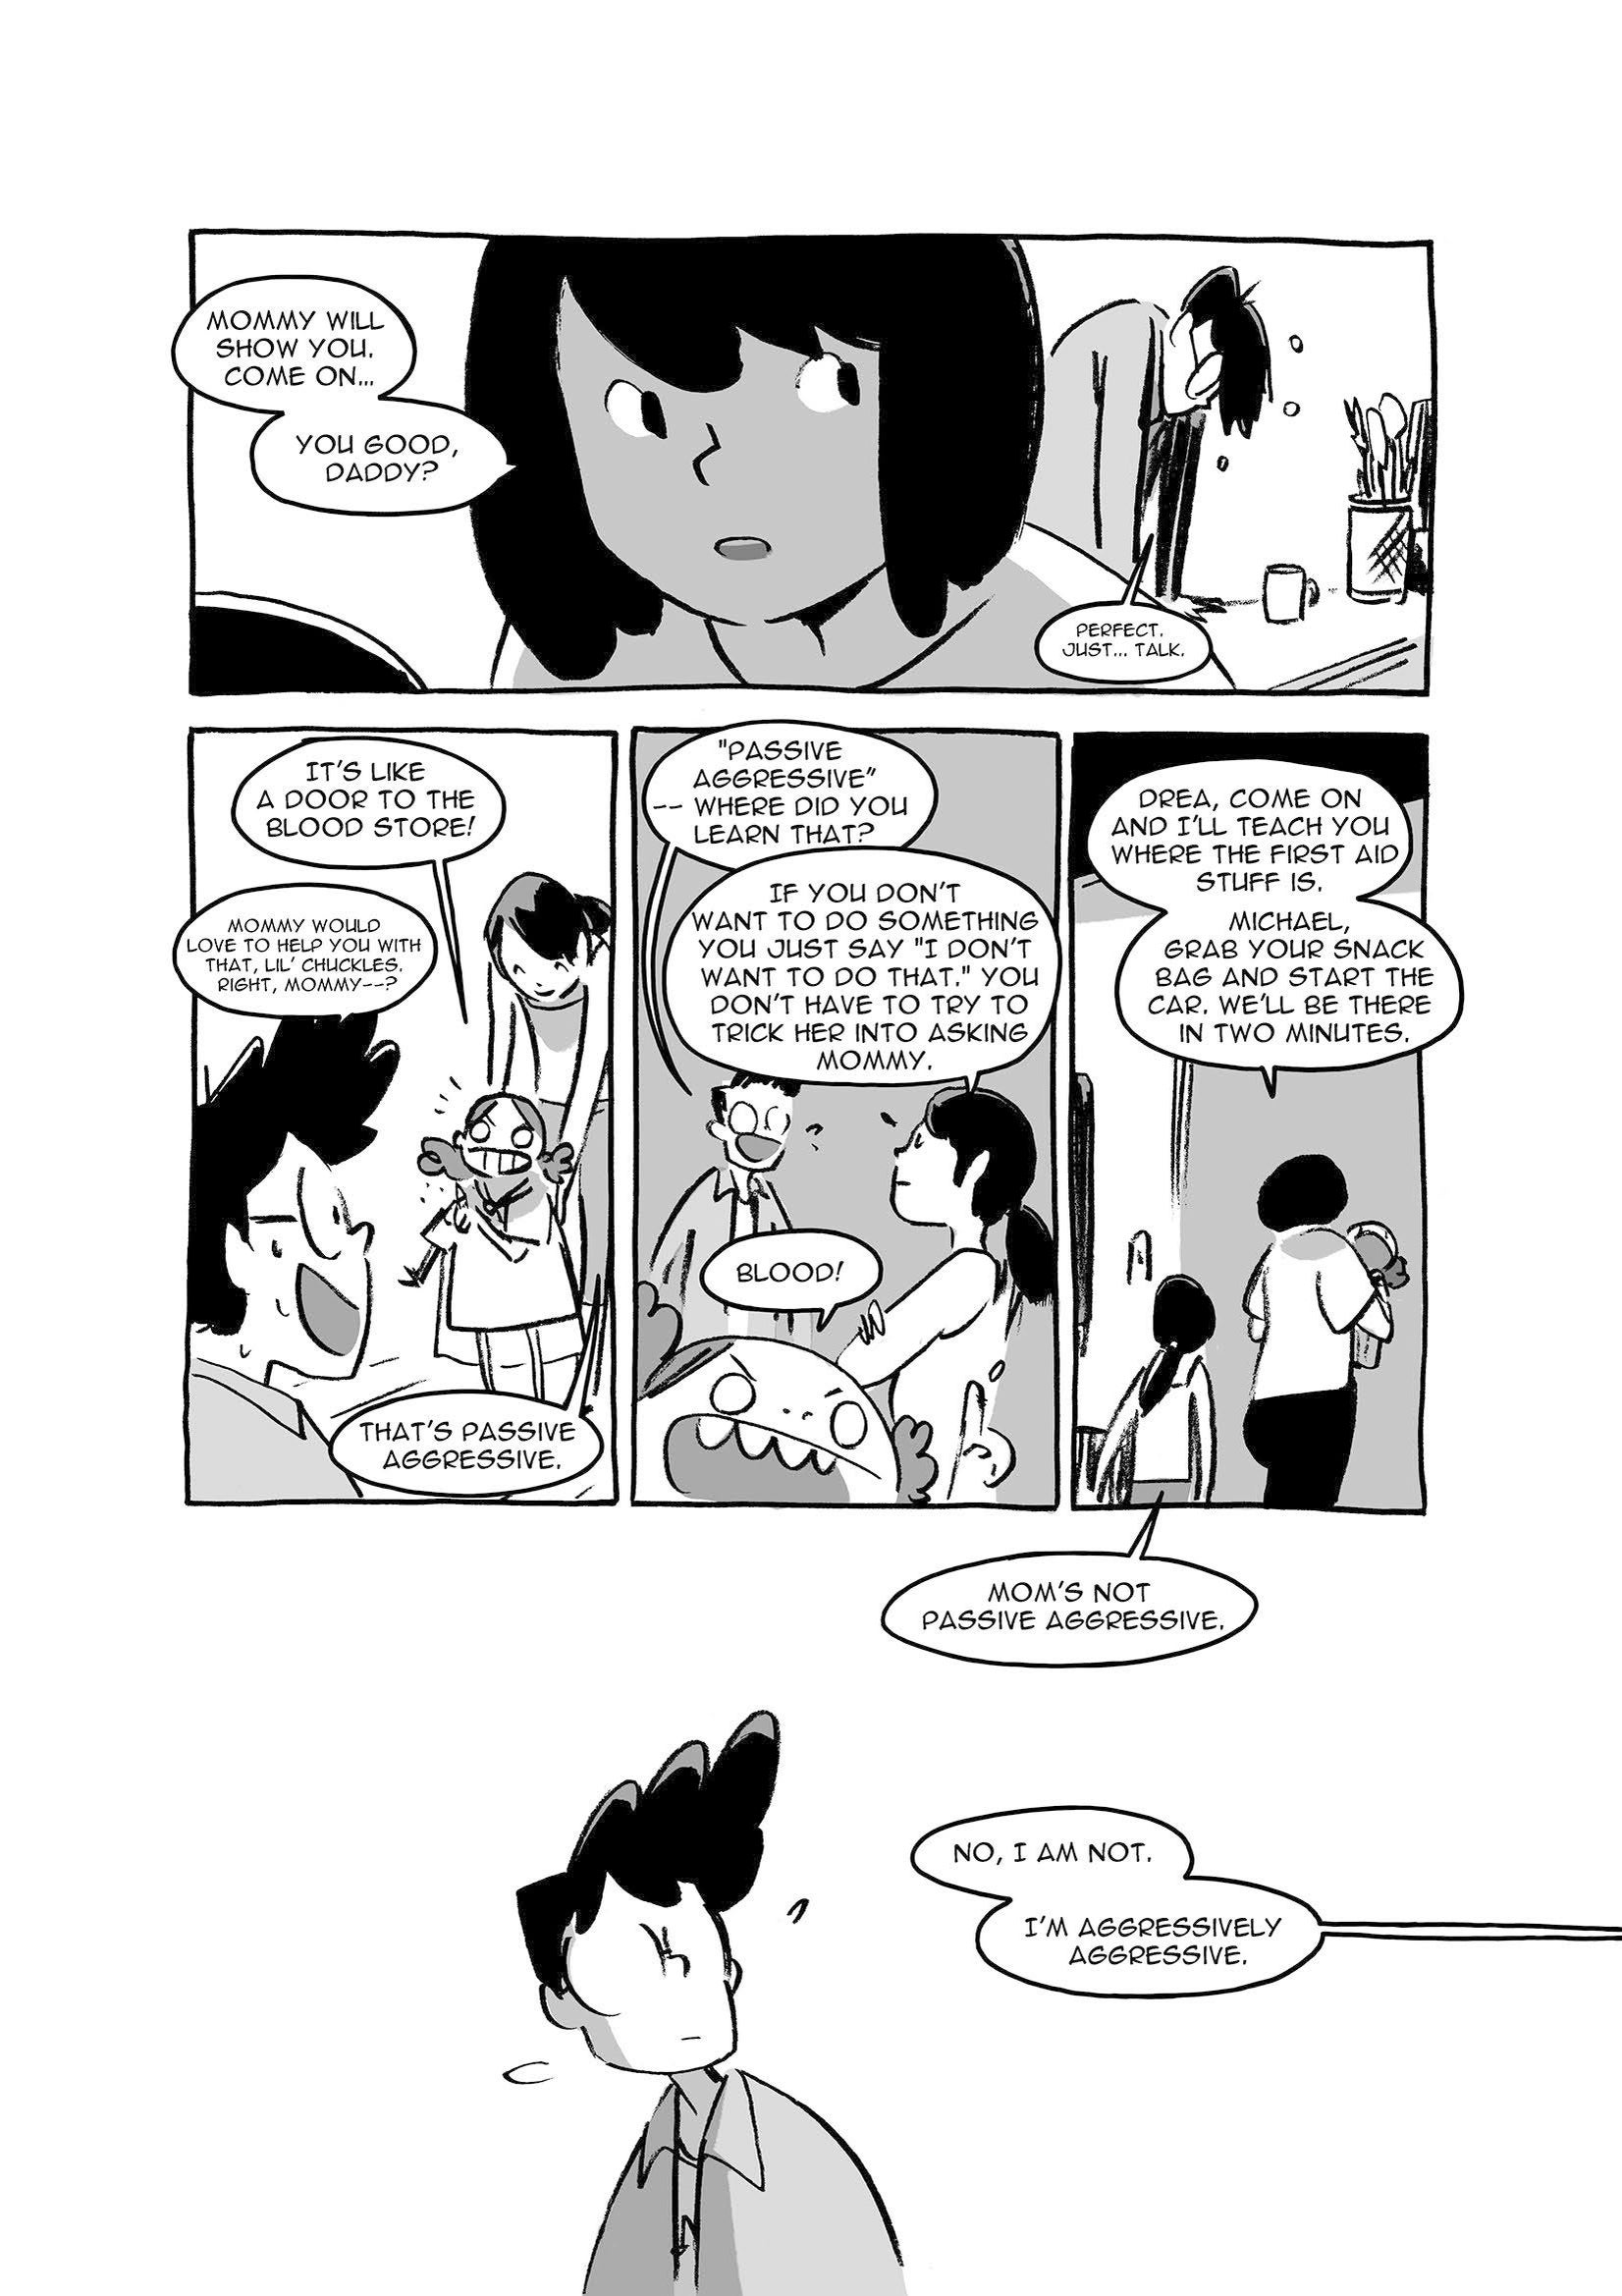 immortal-issue-2-page1-page-3.jpg